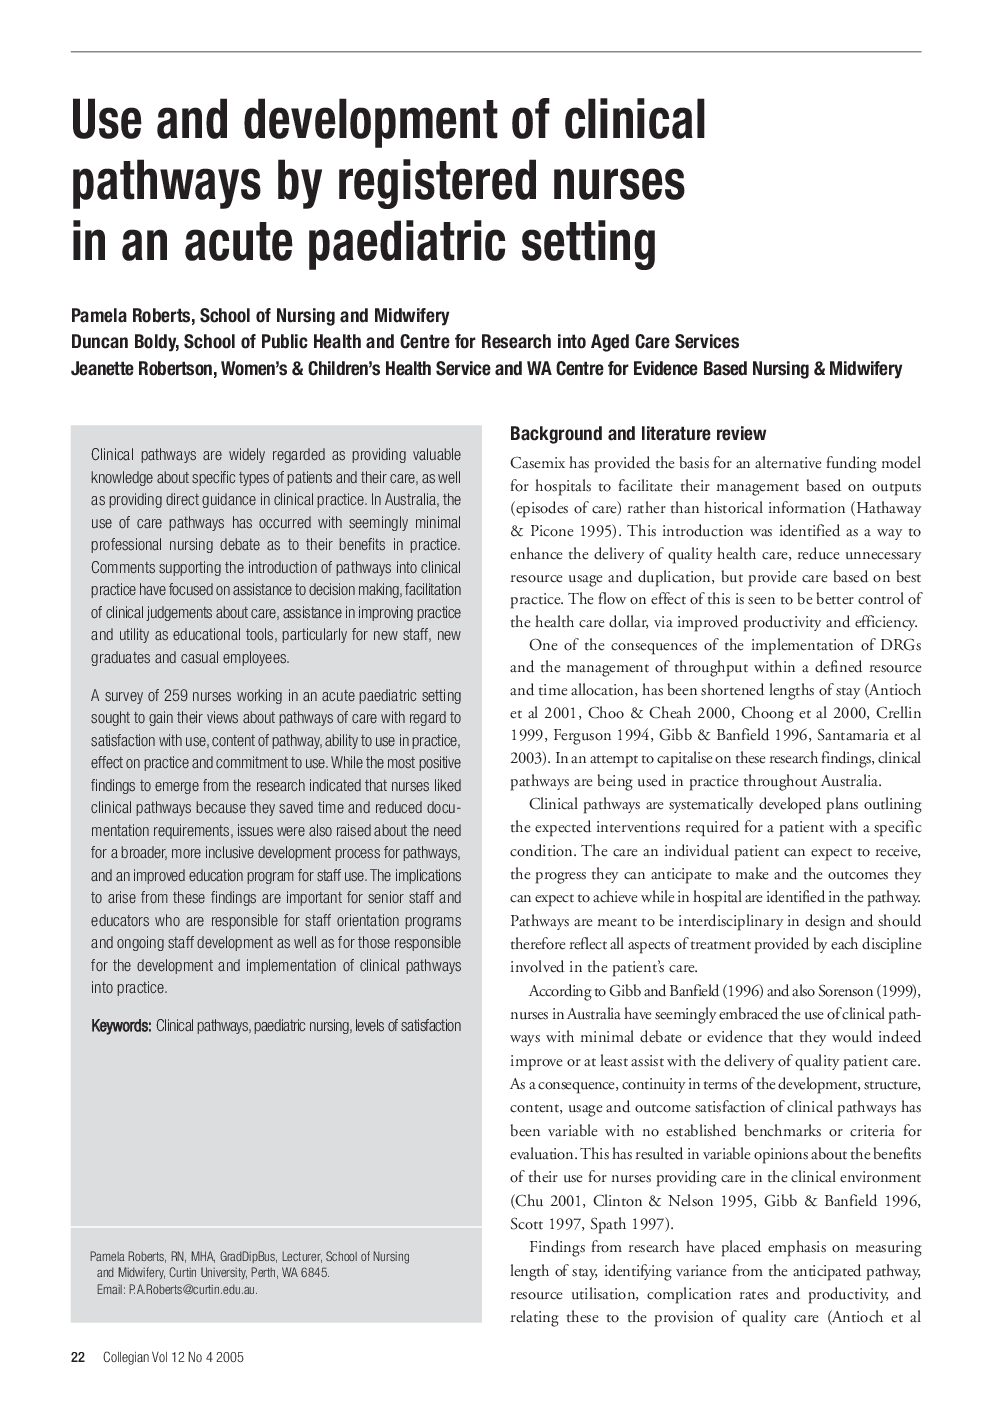 Use and development of clinical pathways by registered nurses in an acute paediatric setting